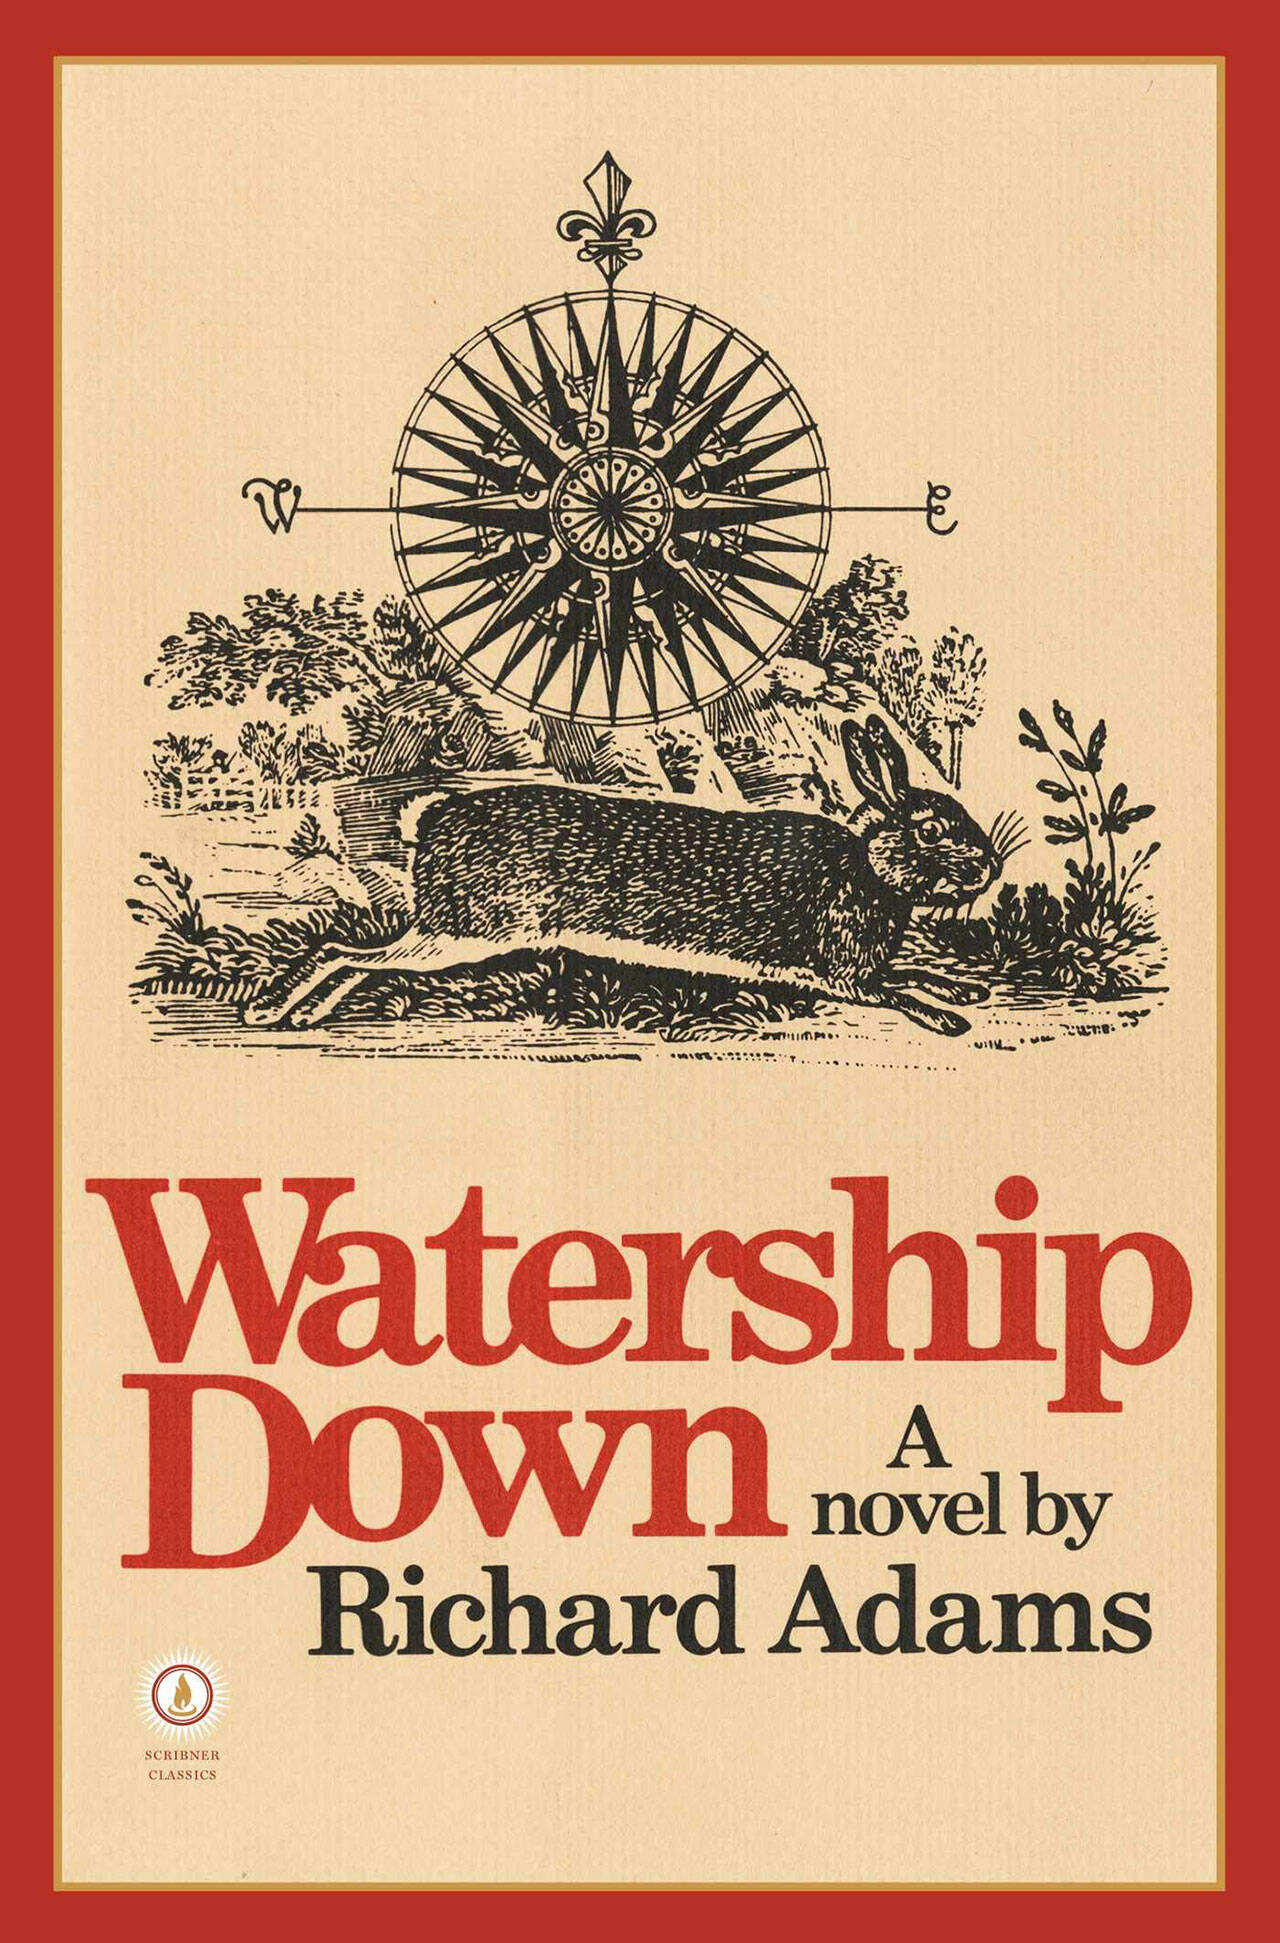 (Courtesy Photo) Daniel Kraus on “Watership Down:” It’s deep, mystical, and I’ve re-read it more than any other book.”